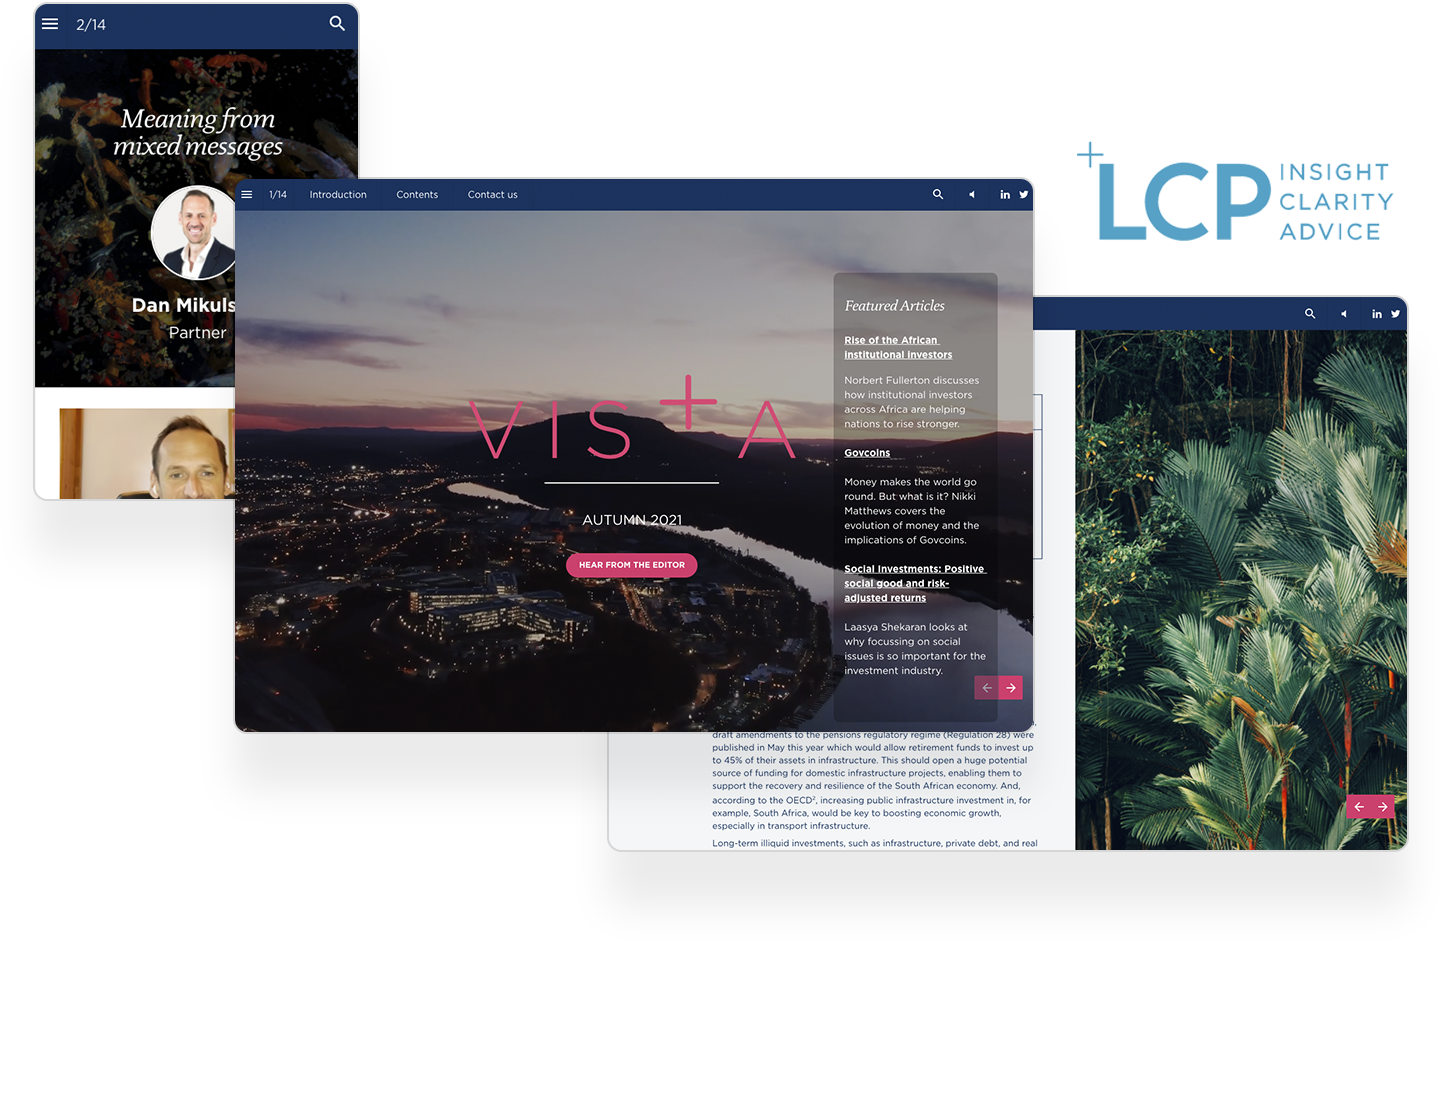 LCP-interactive-investment-magazine